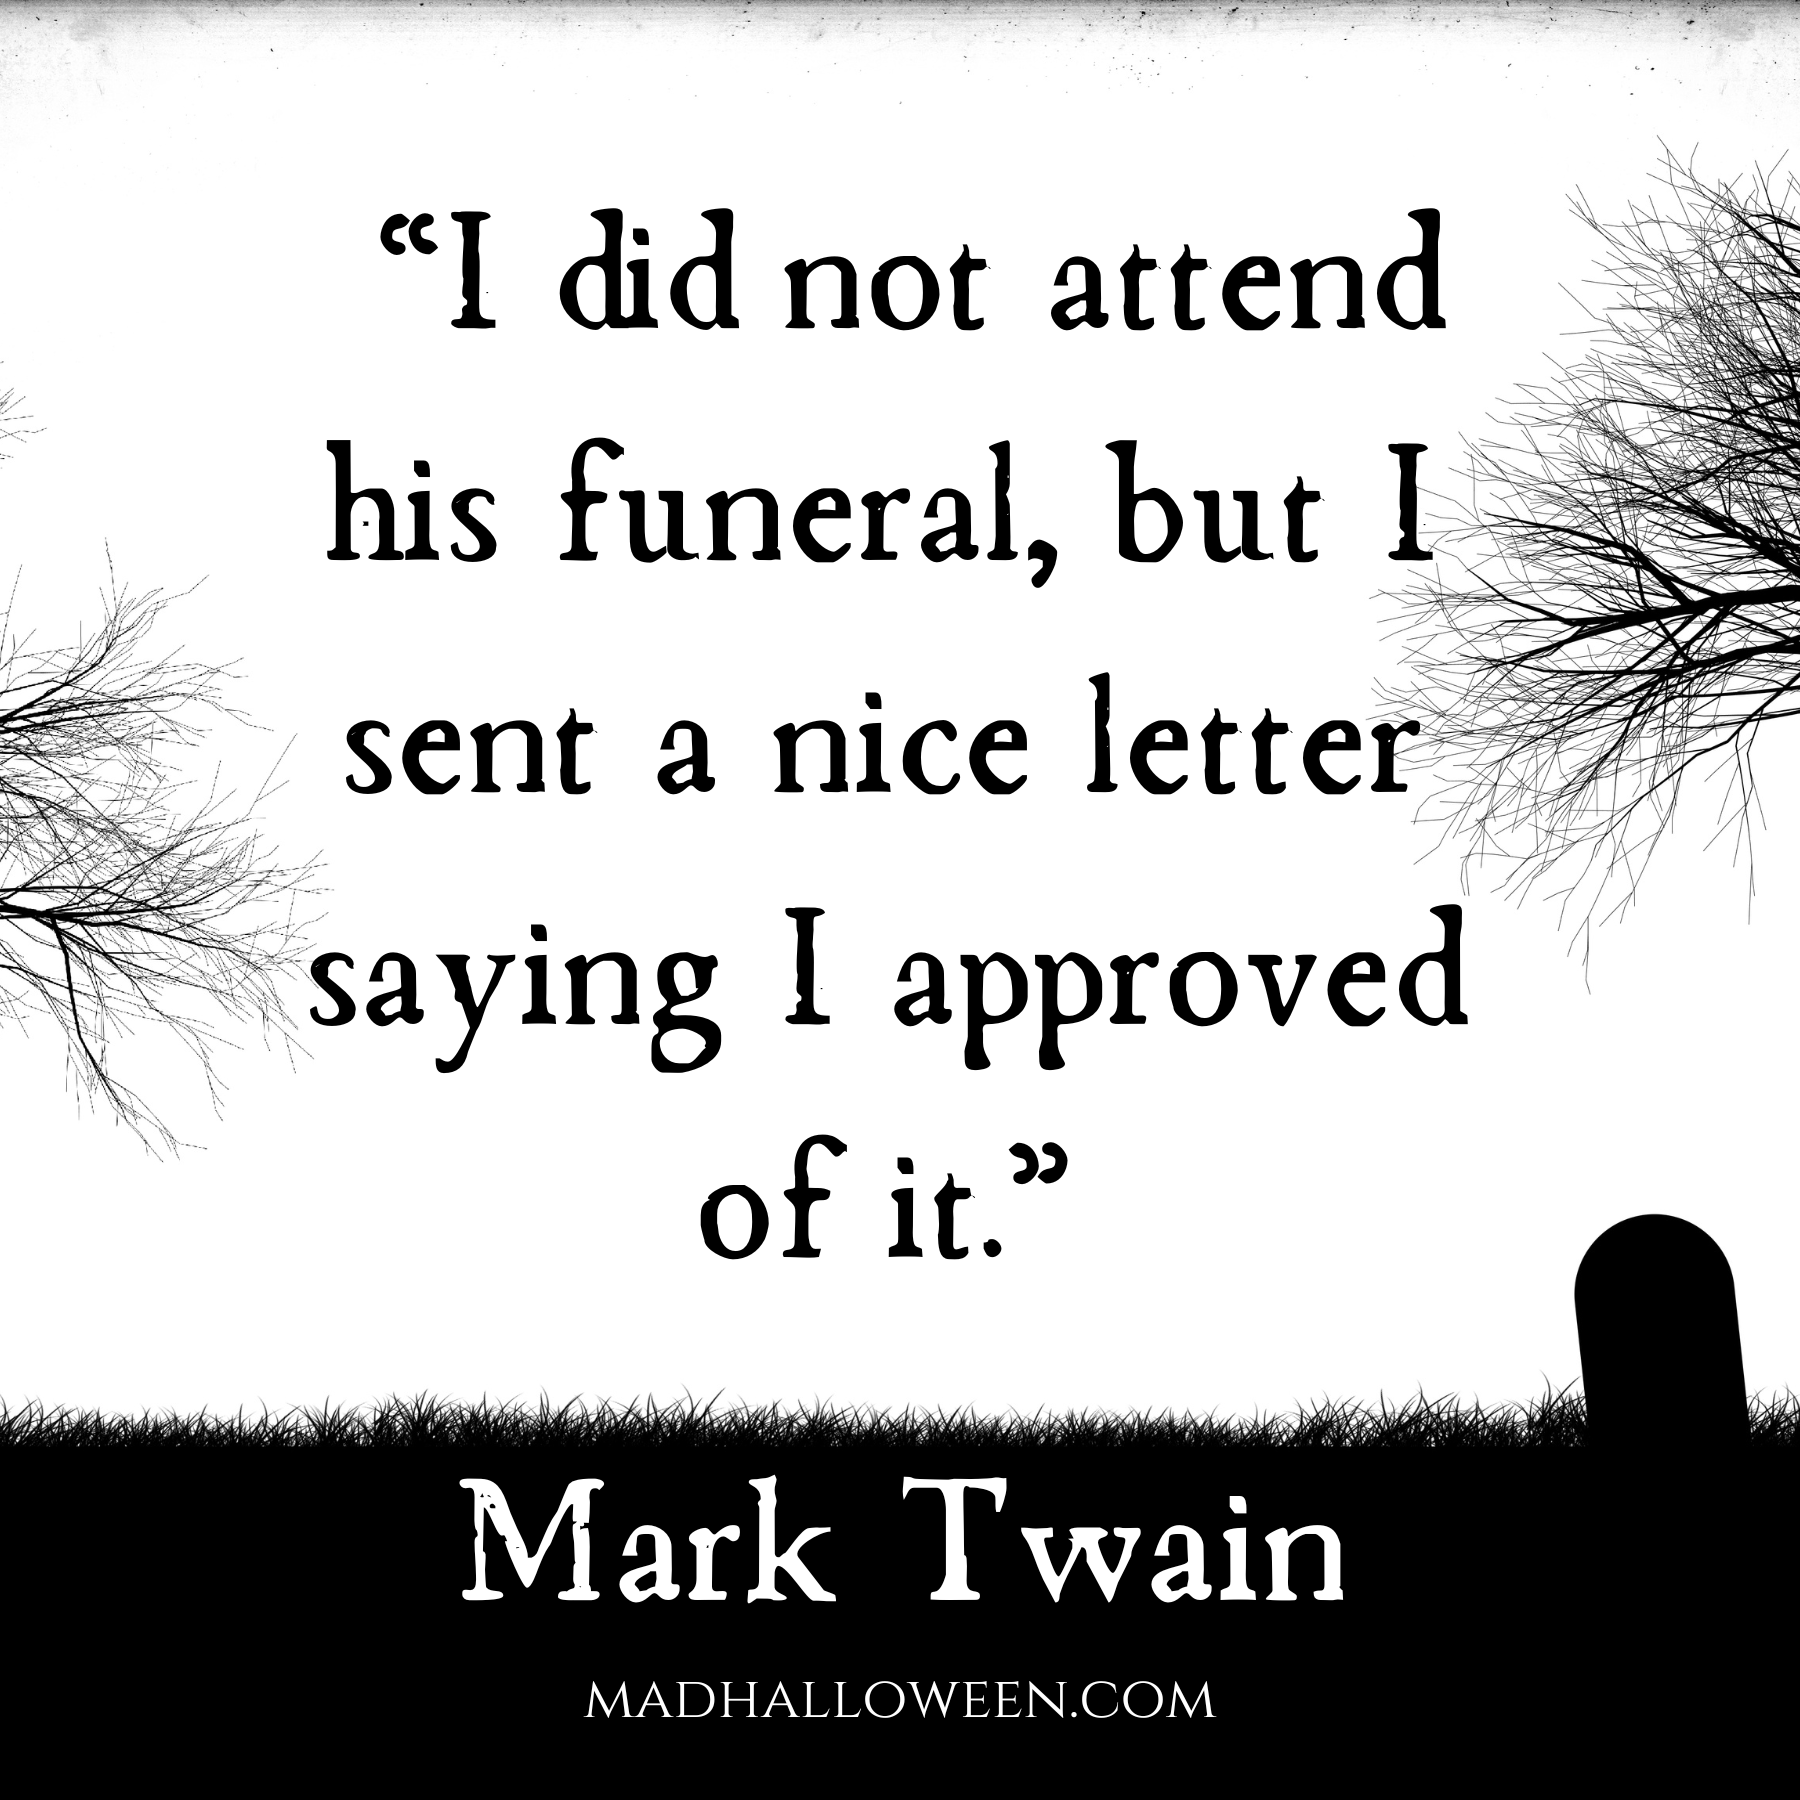 Dark Quotes for Halloween - “I did not attend his funeral, but I sent a nice letter saying I approved of it.”― Mark Twain - Mad Halloween